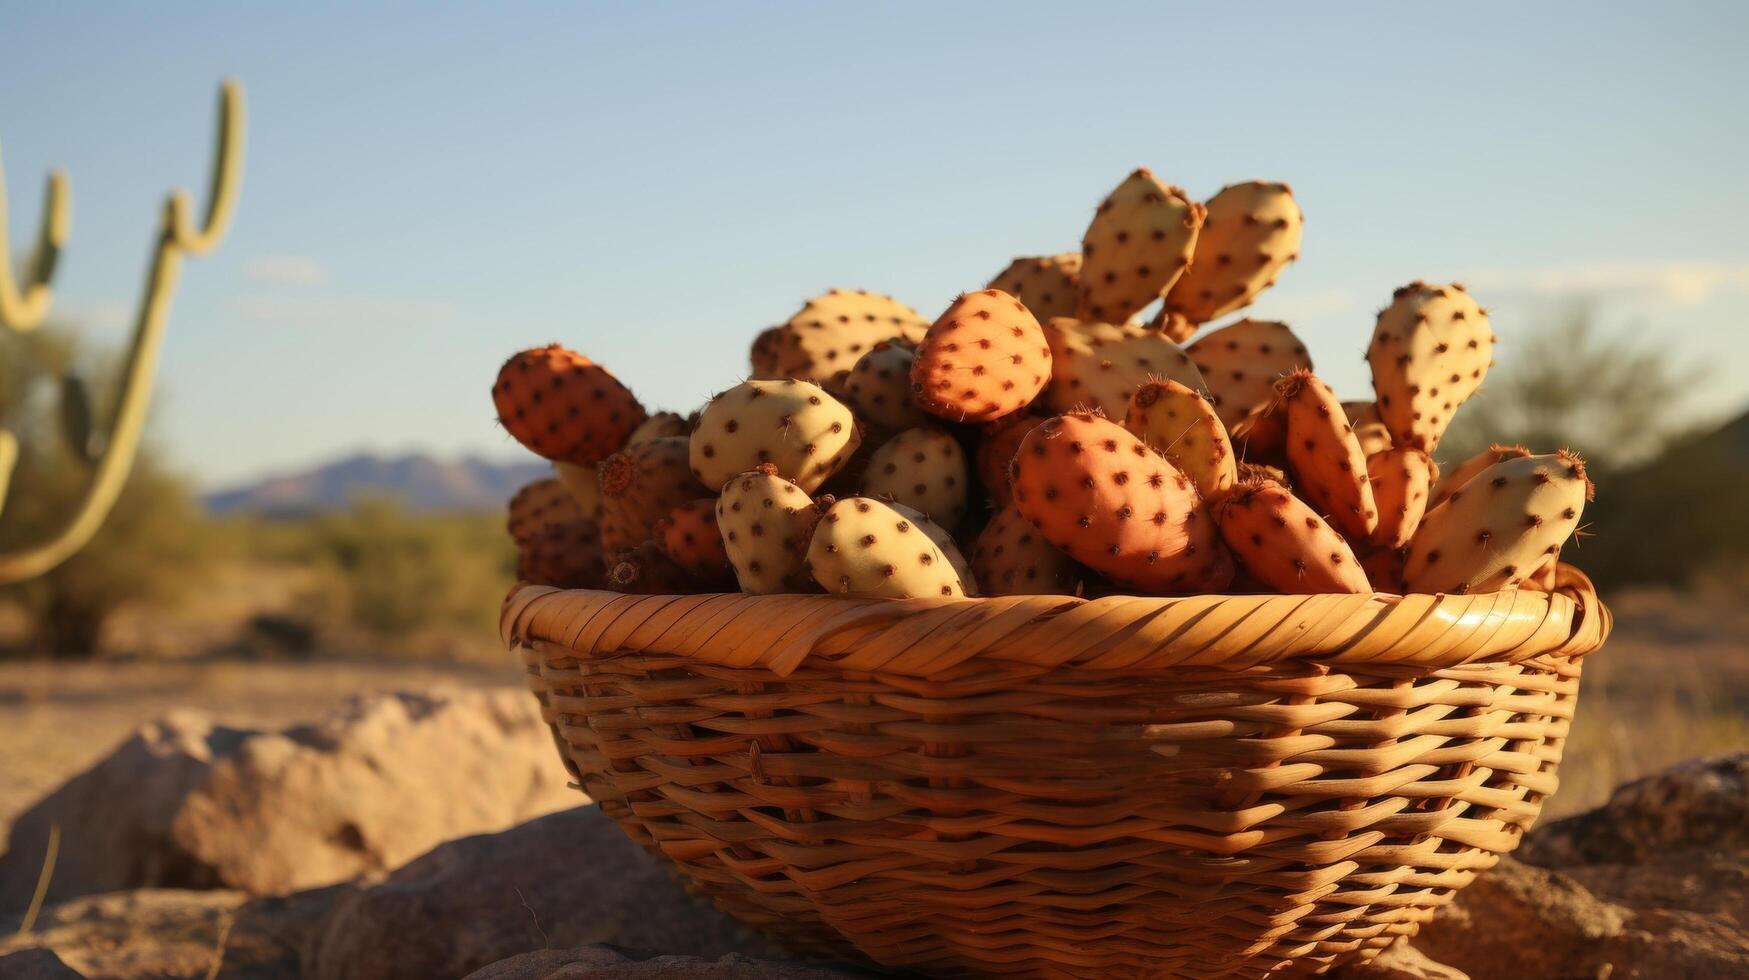 AI generated Basket of prickly pears in a desert setting photo